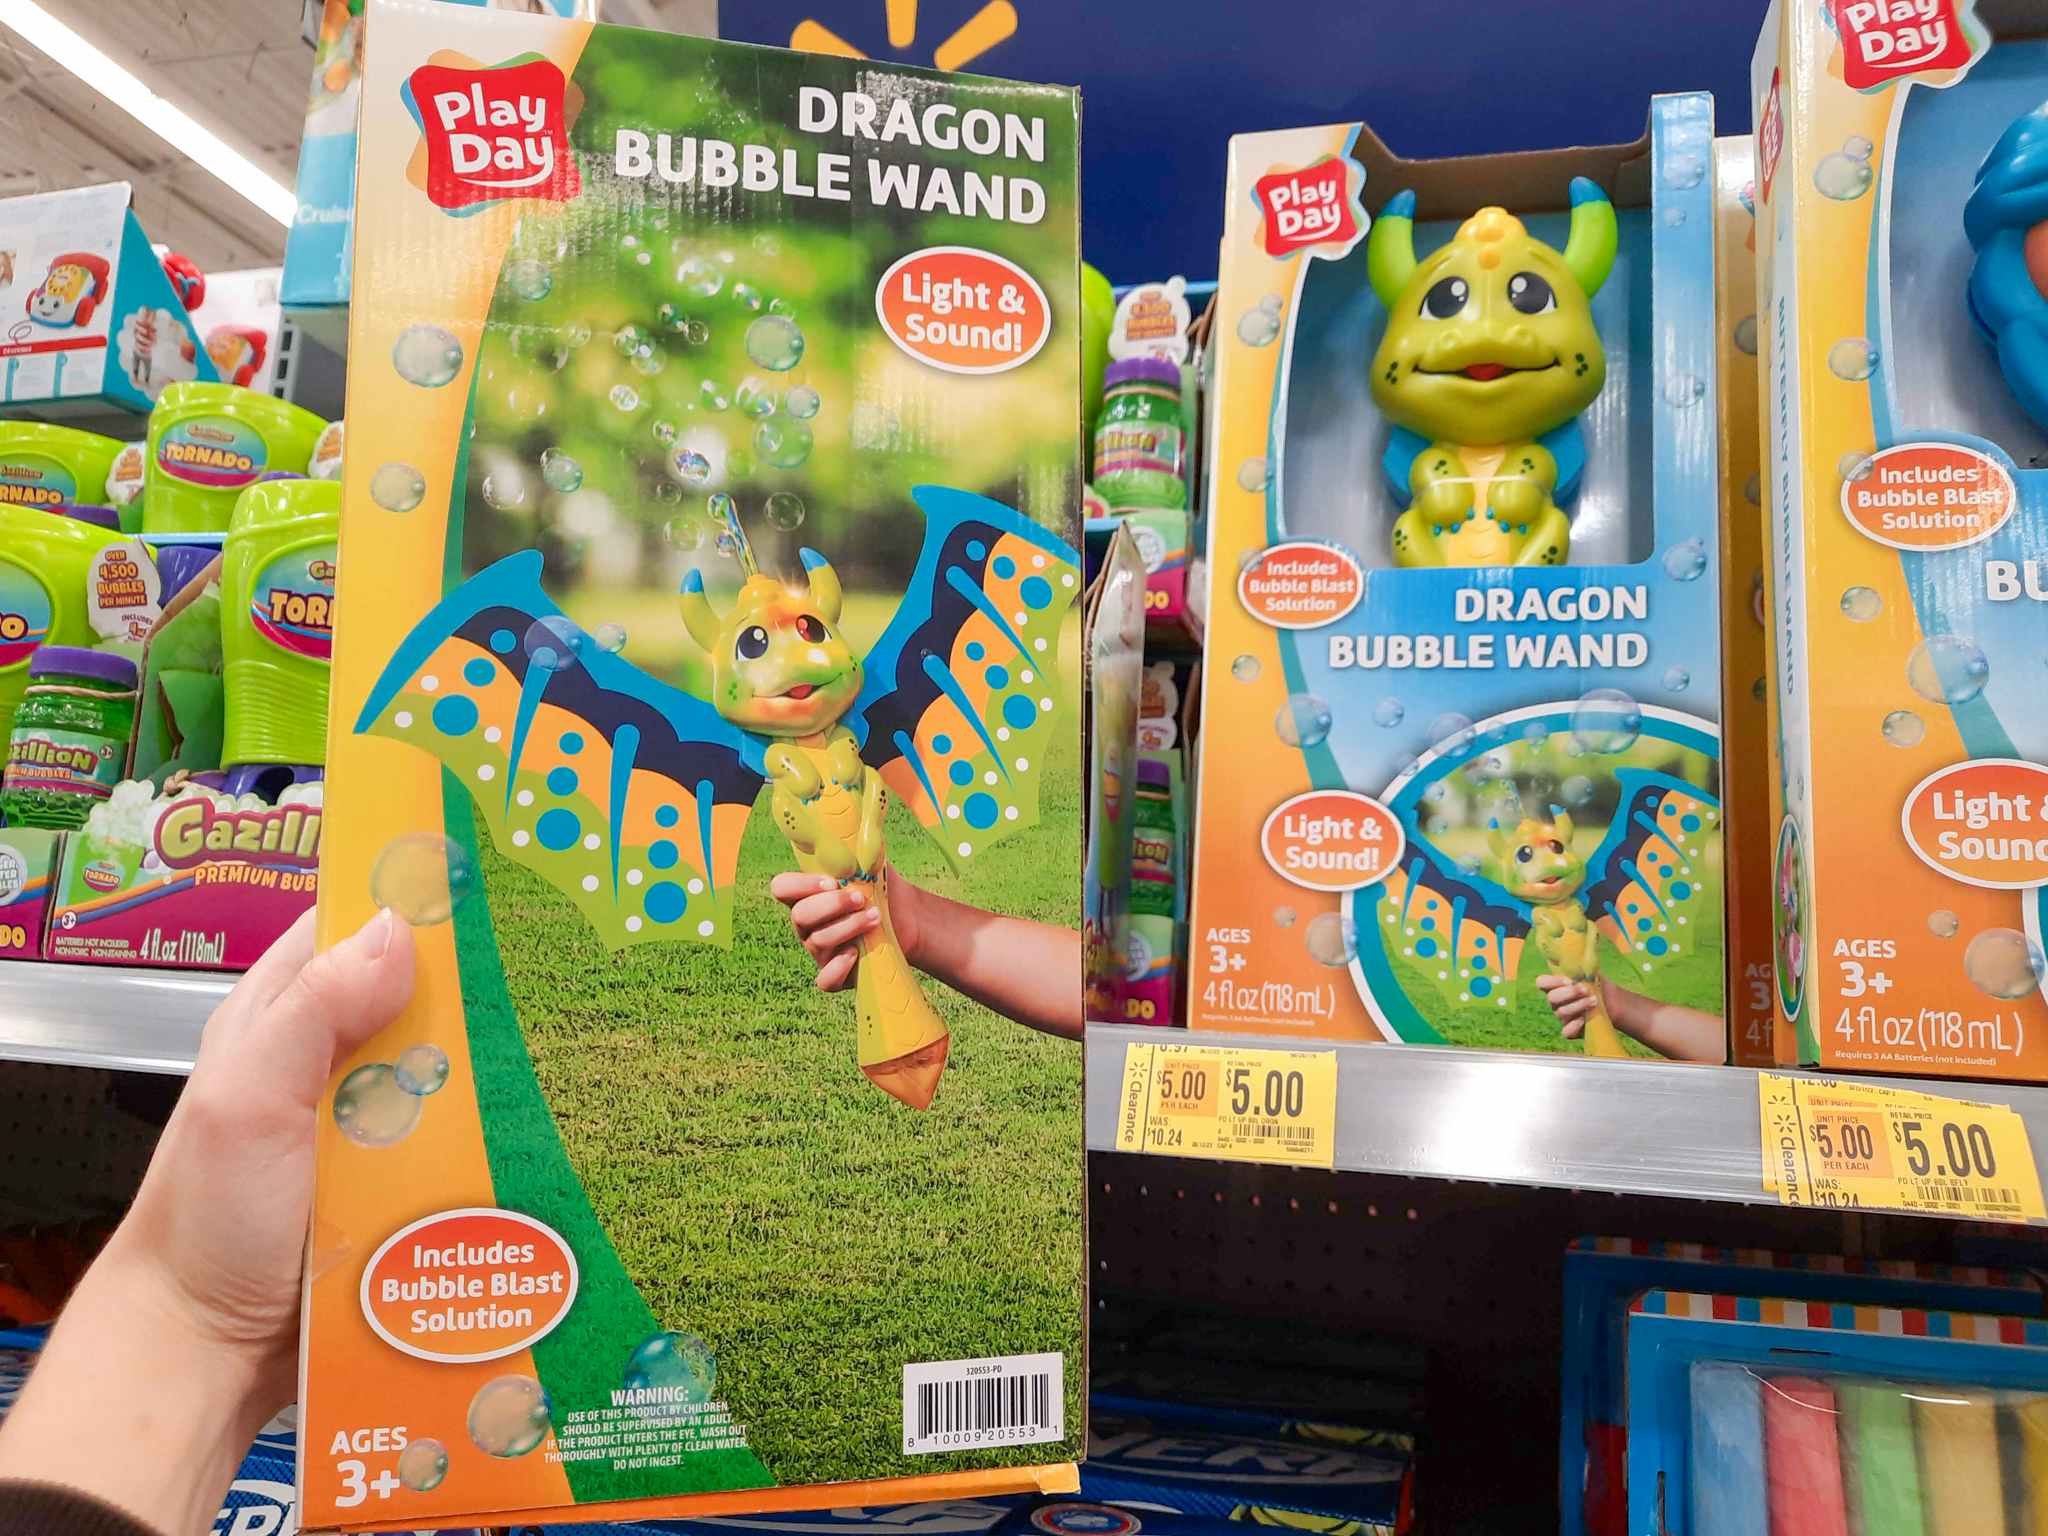 Dragon Bubble Wand toy held in front of $5 clearance tag at Walmart